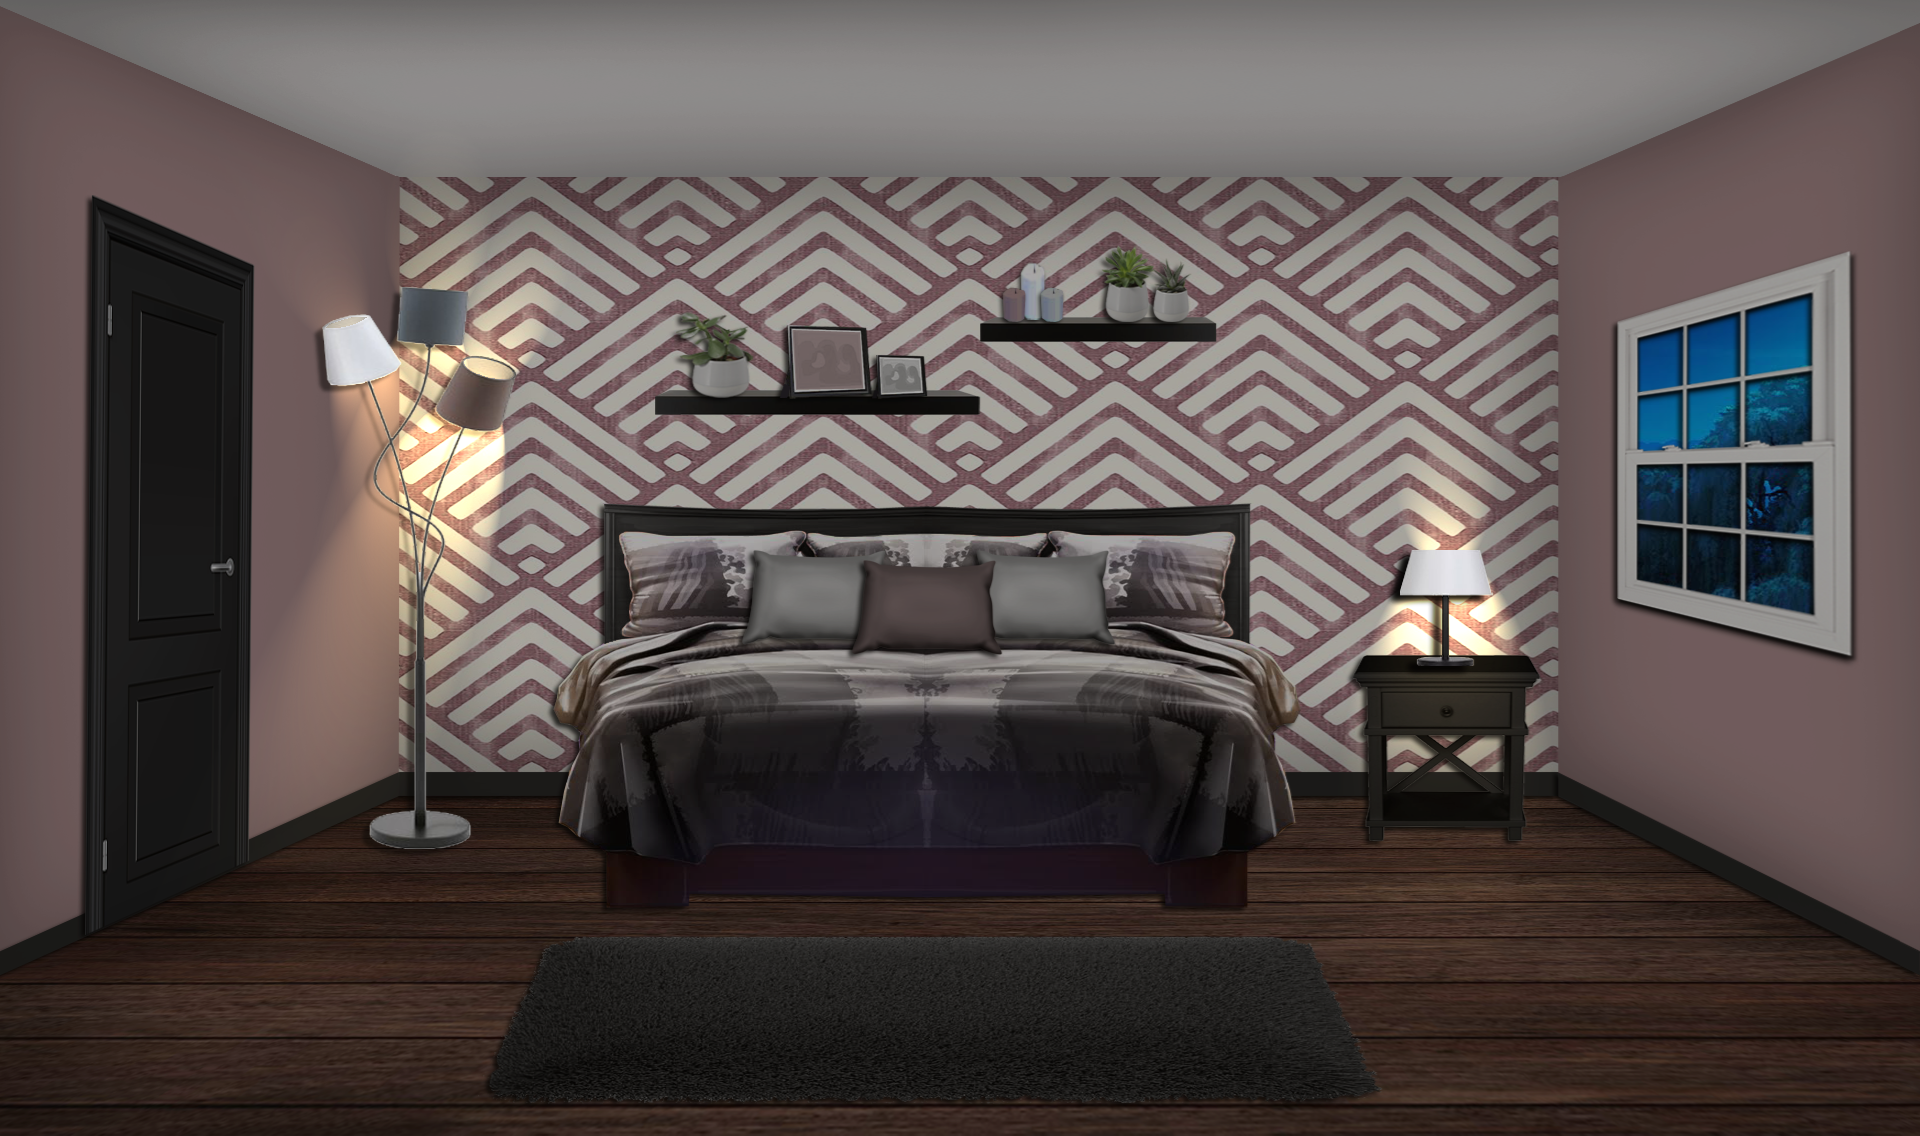 INT. COURTNEY BEDROOM WITH LIGHTS – NIGHT